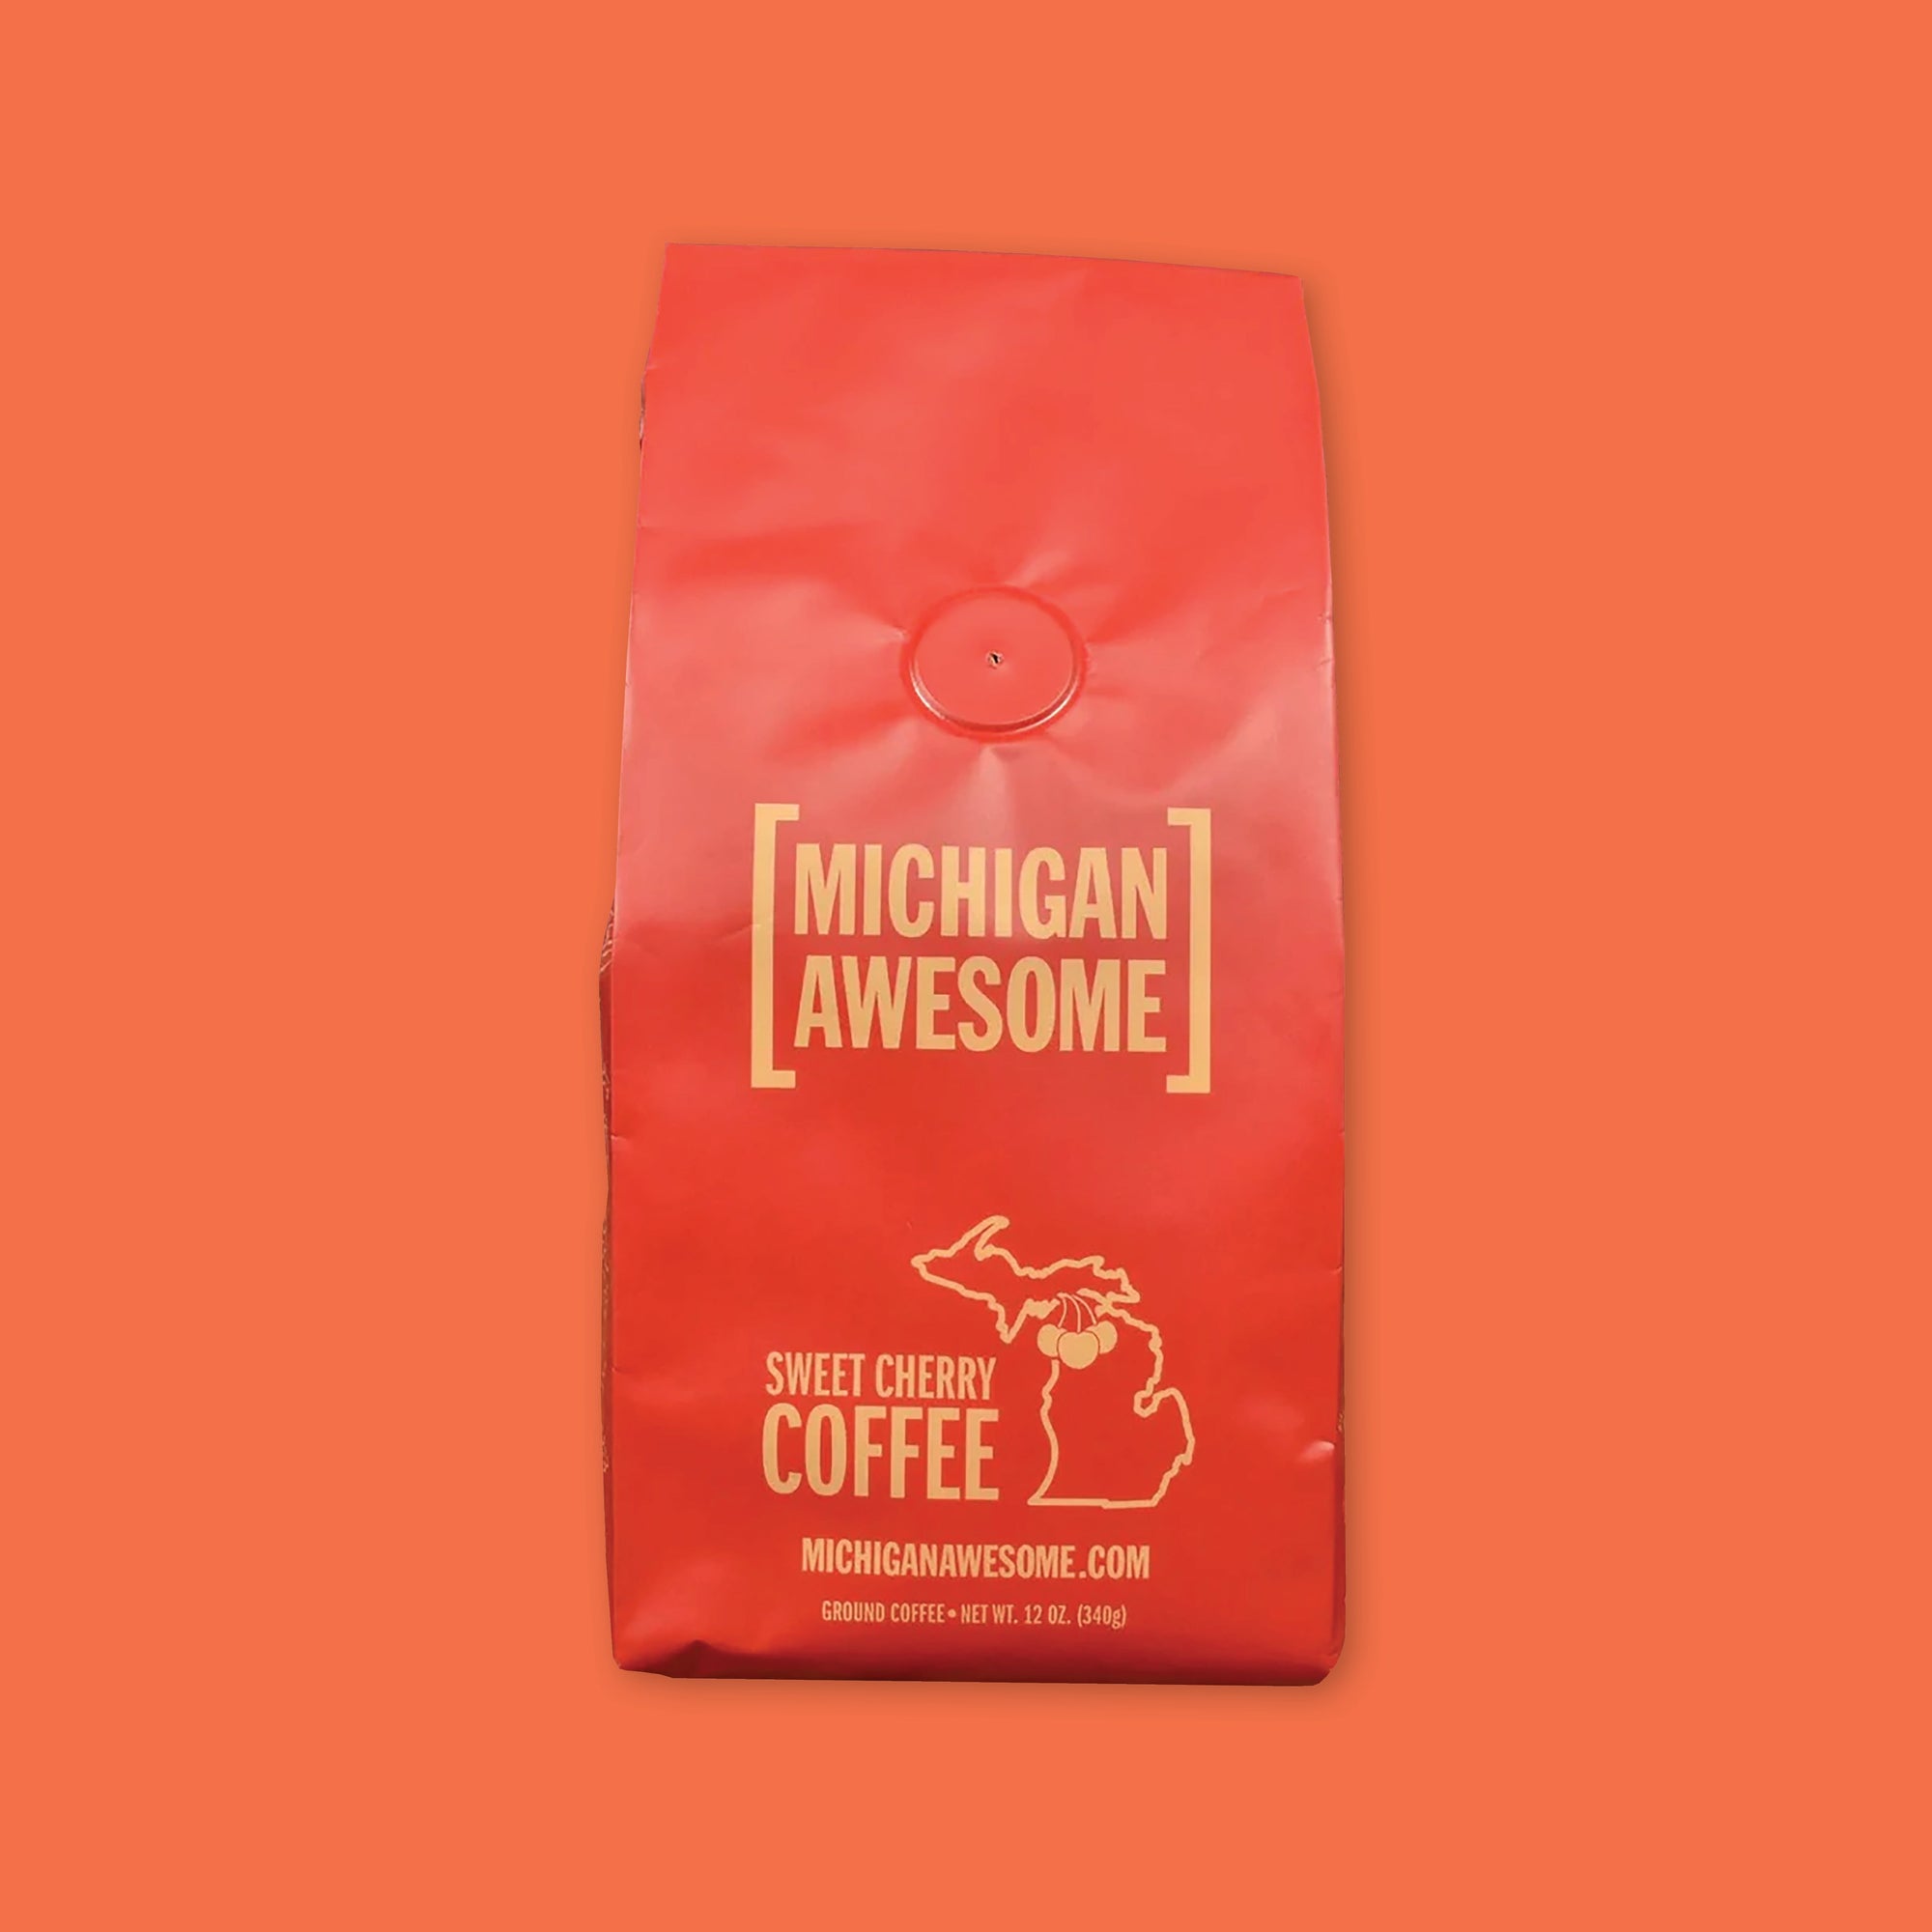 On an orangey red background is a red bag of coffee. The coffee is Michigan Awesome brand Sweet Cherry Ground Coffee. 12 oz (350 g)